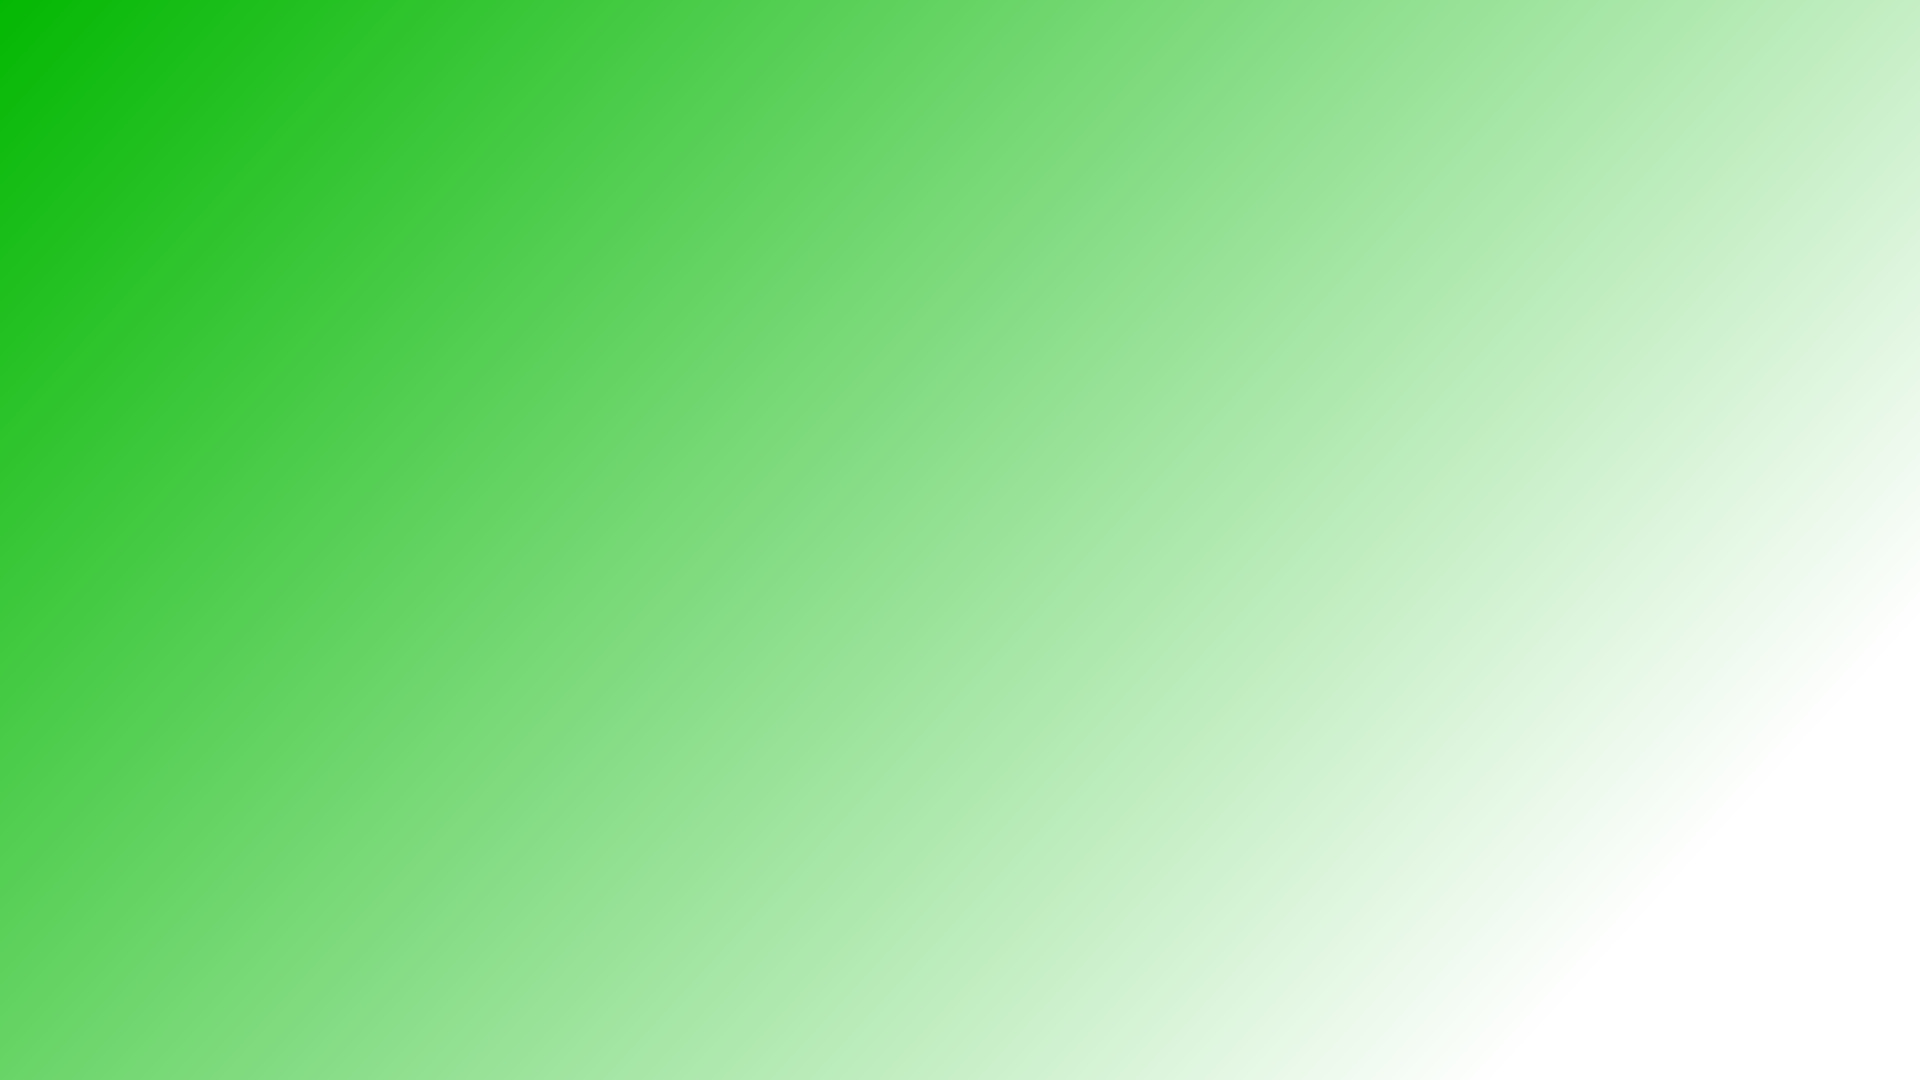 Green and white gradient background